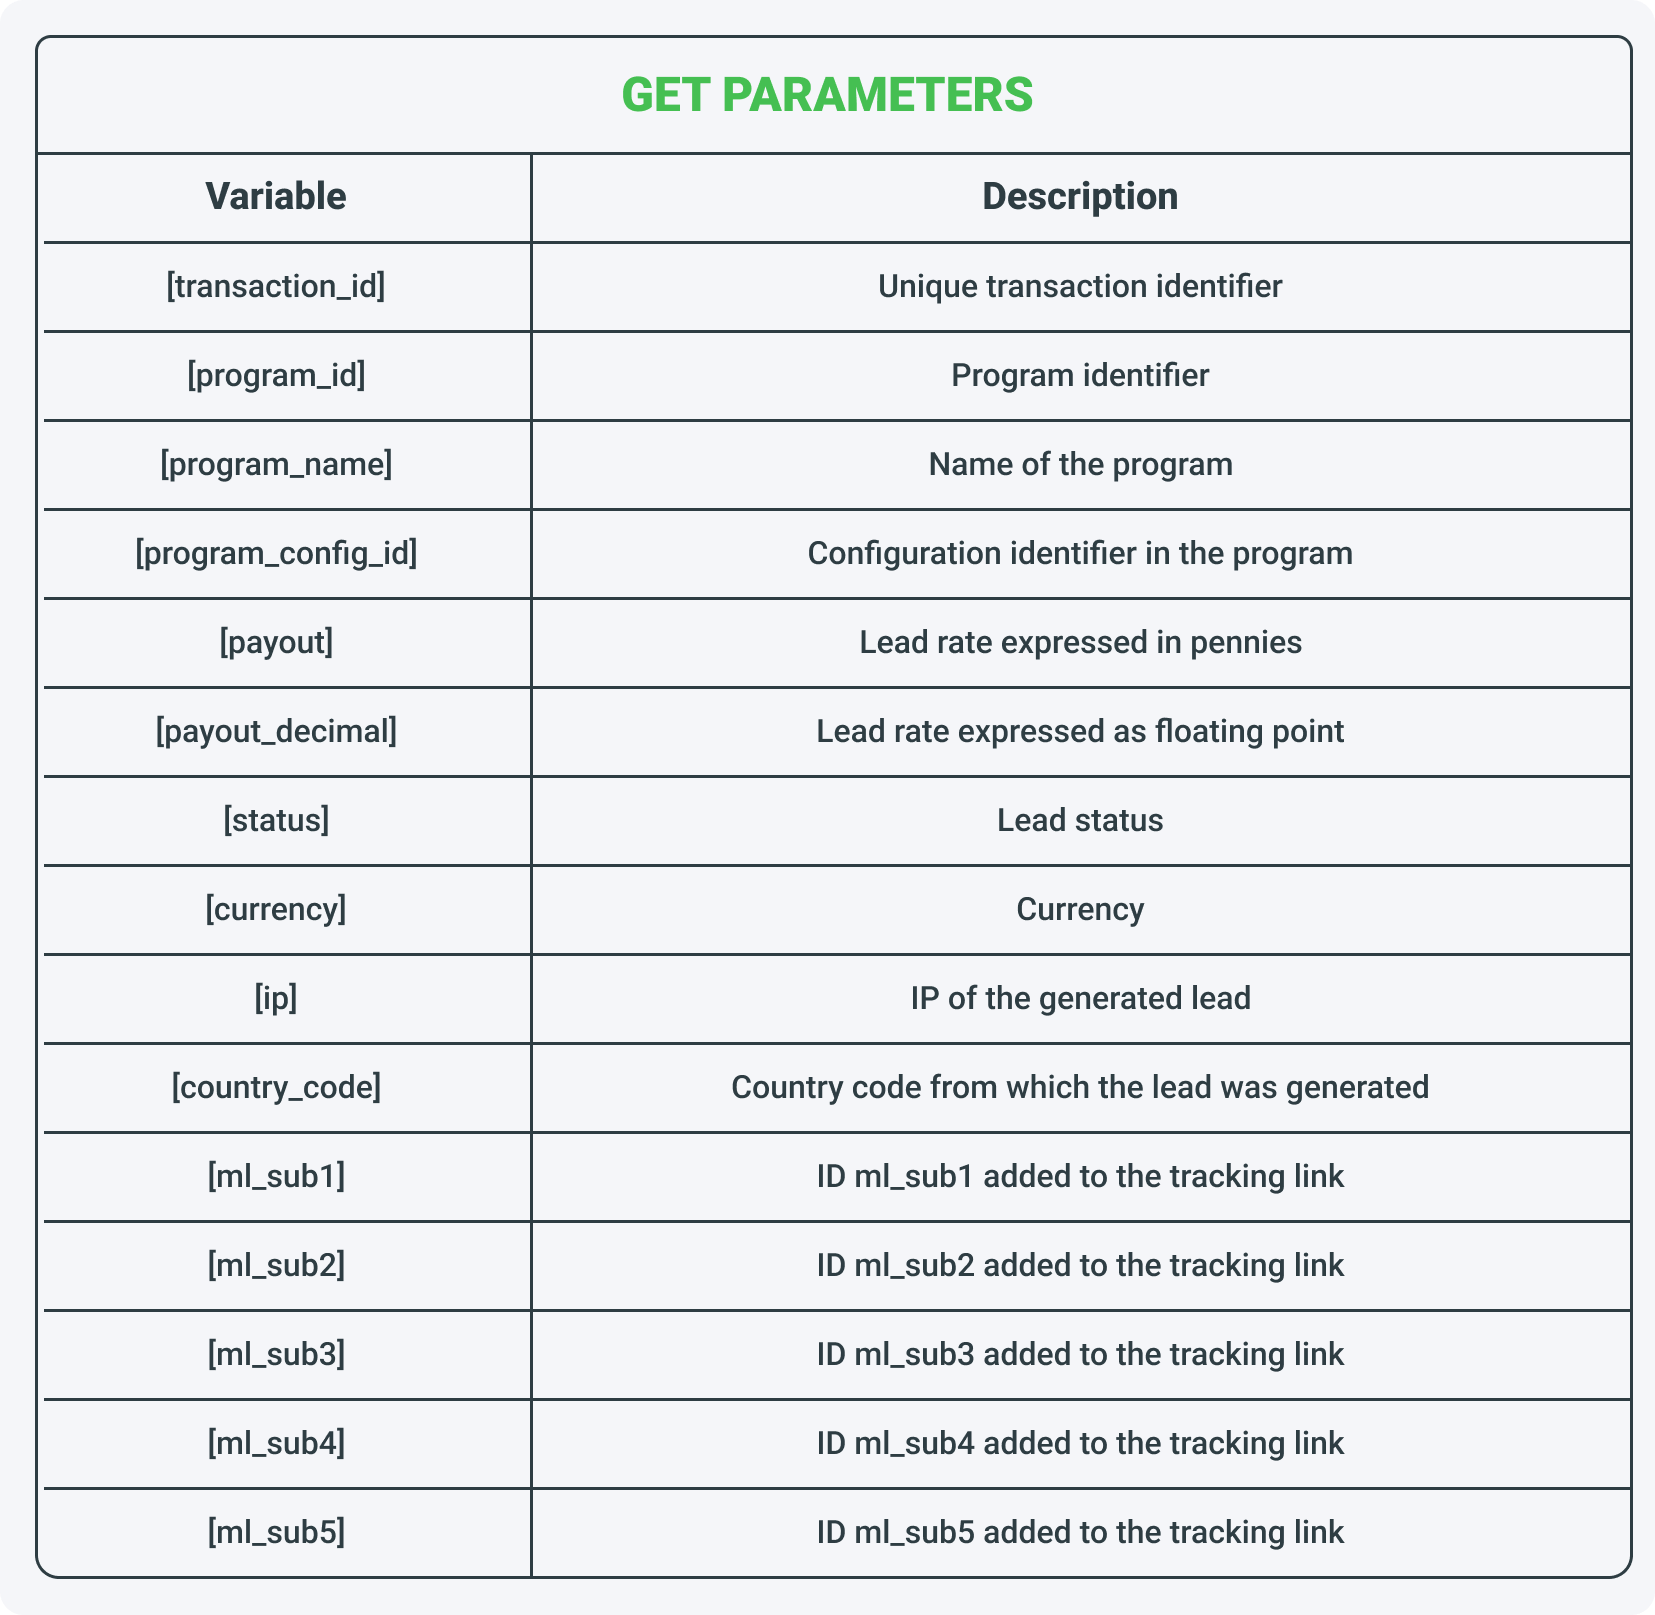 postback API variables available in GET parameters